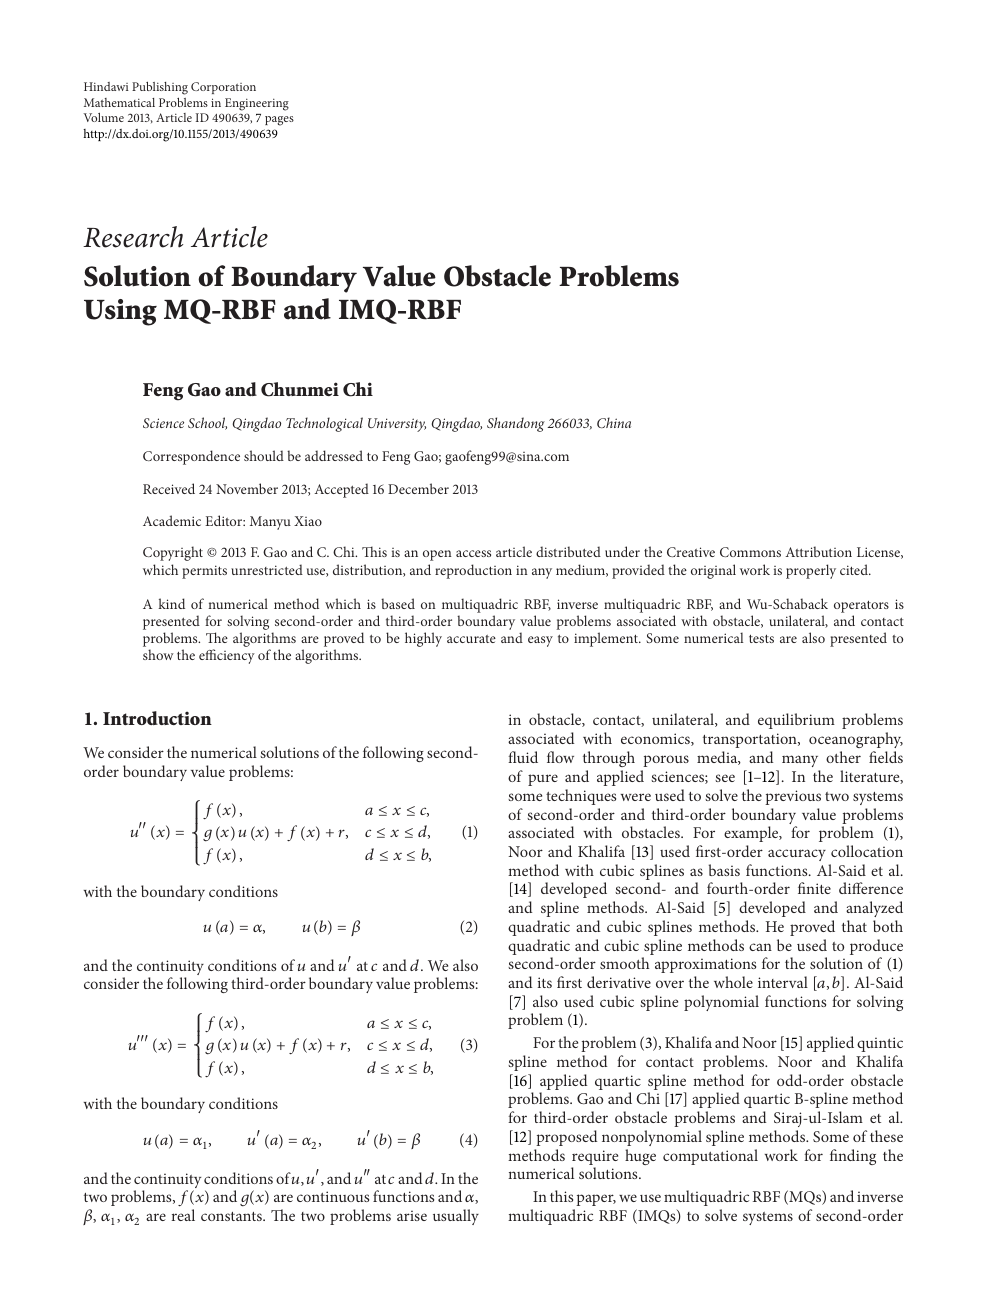 Solution Of Boundary Value Obstacle Problems Using Mq Rbf And Imq Rbf Topic Of Research Paper In Mathematics Download Scholarly Article Pdf And Read For Free On Cyberleninka Open Science Hub